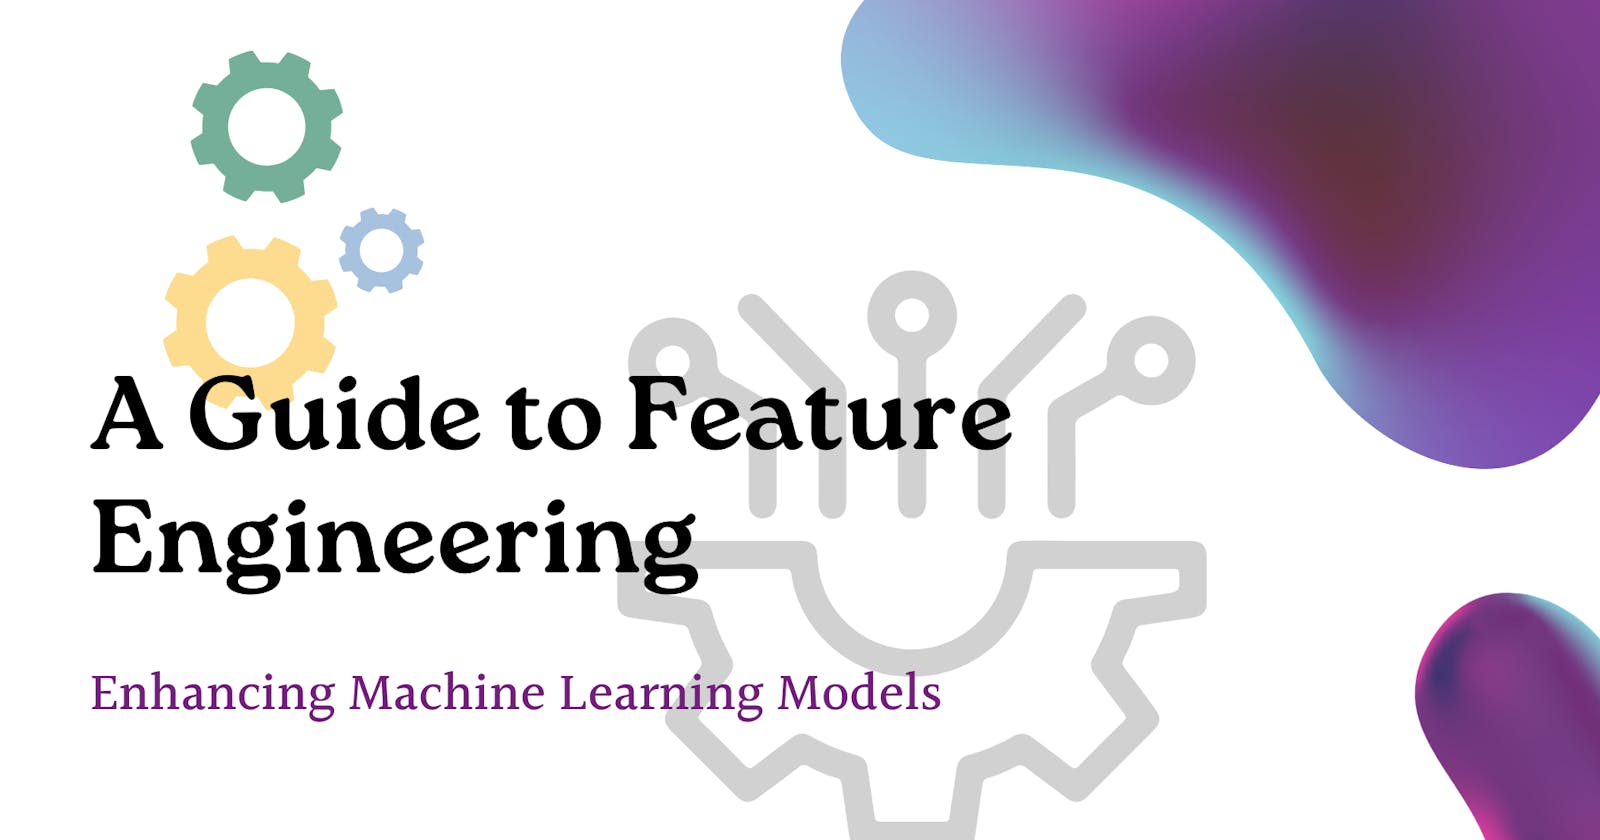 Enhancing Machine Learning Models: A Guide to Feature Engineering for House Price Prediction